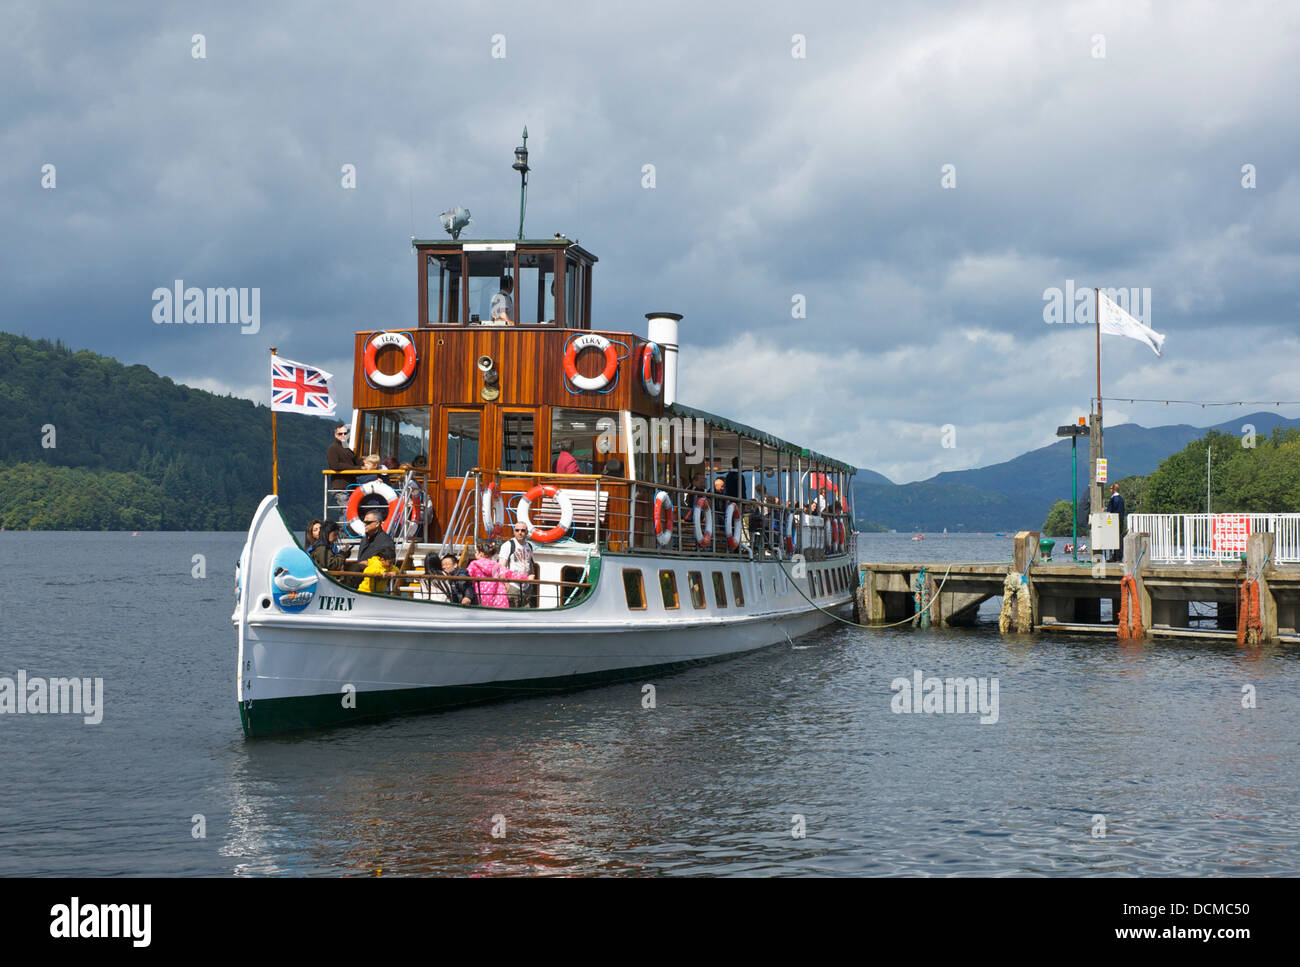 Mv Teal A Steamer Operated By Windermere Lake Cruises At Bowness